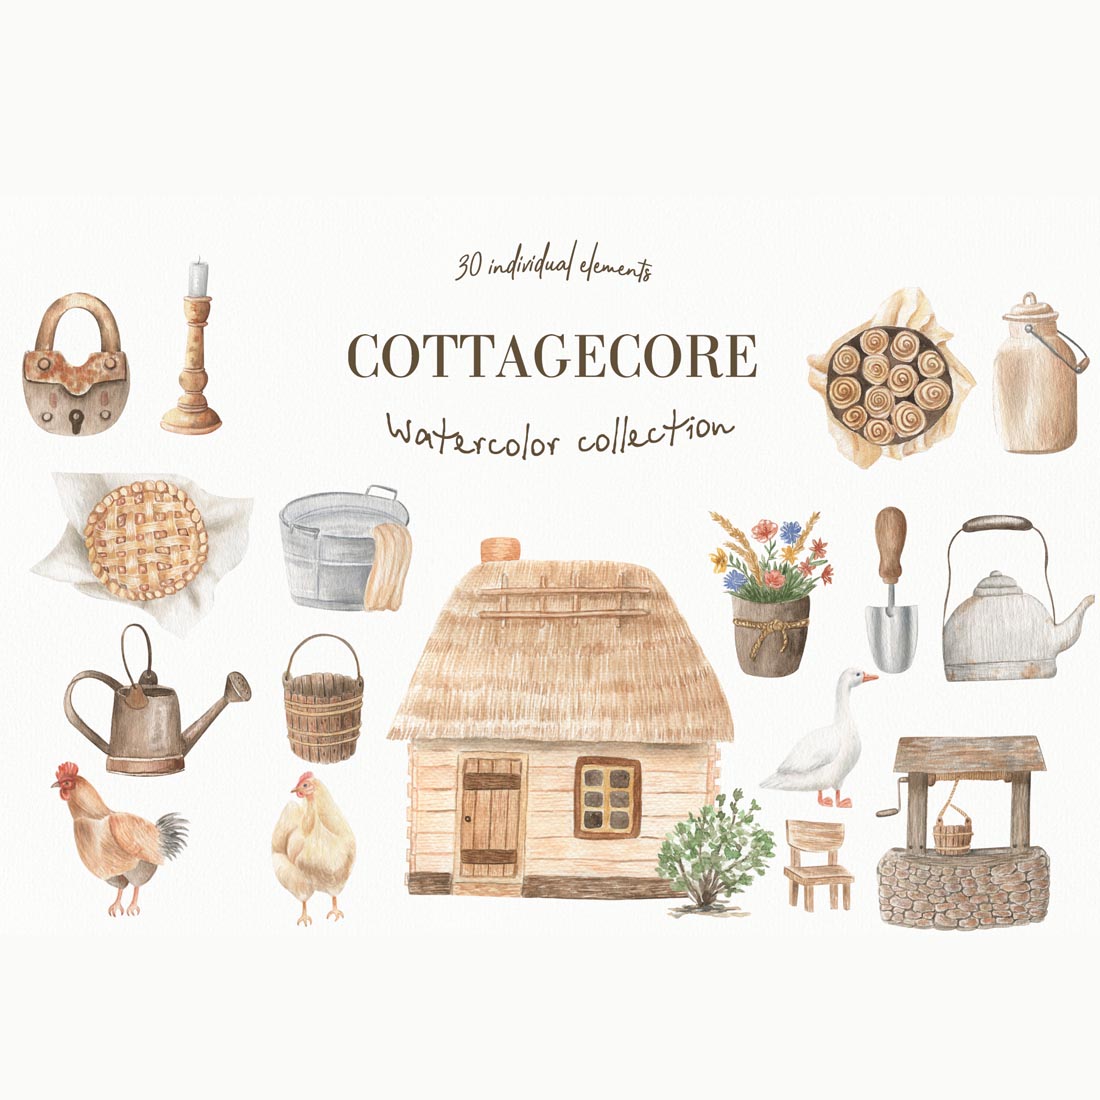 Cottagecore watercolor collection.